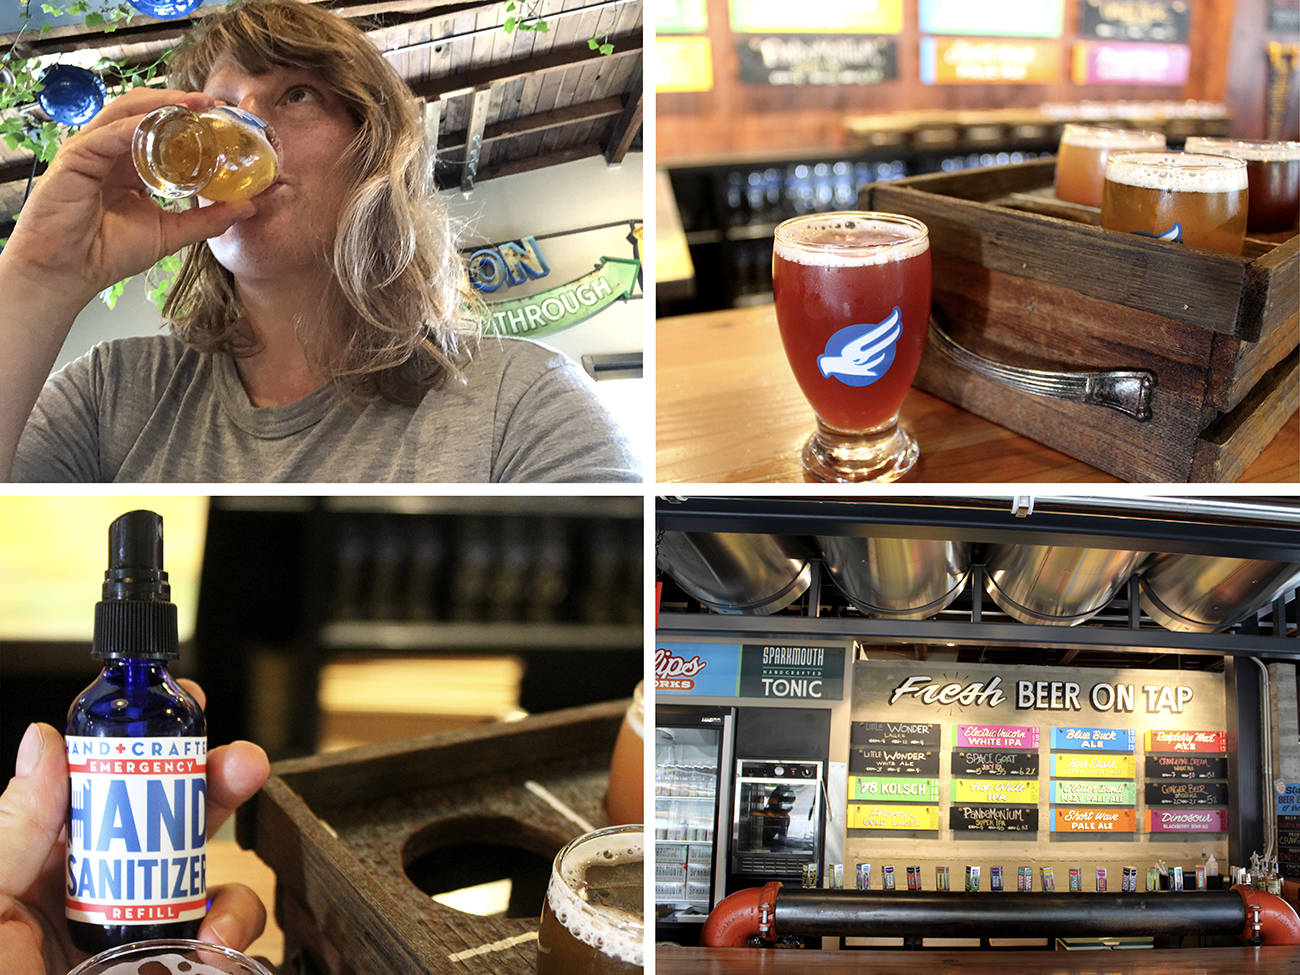 Phillips Brewing & Malting Co. has a full slate of beers, sodas, spirits and even company hand sanitizer on the menu at their downtown Victoria tasting room. (Photo: Amy Attas)